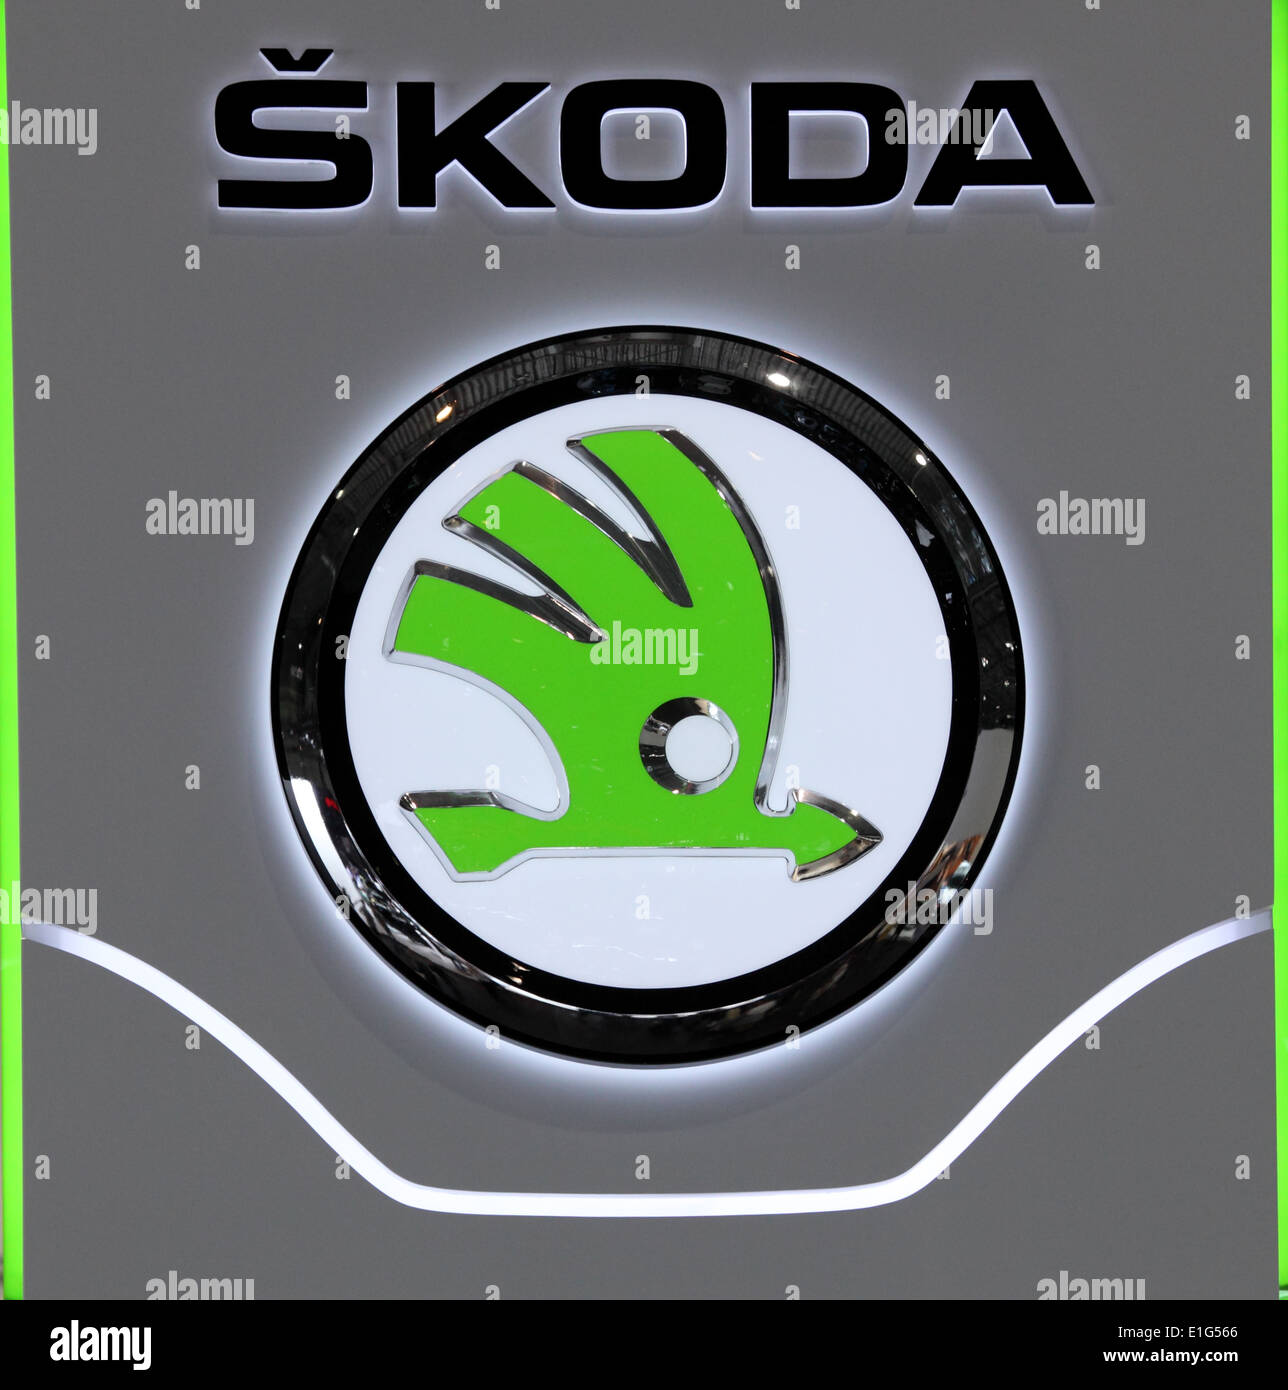 SKODA Logo at the AMI - Auto Mobile International Trade Fair on June 1st, 2014 in Leipzig, Germany Stock Photo